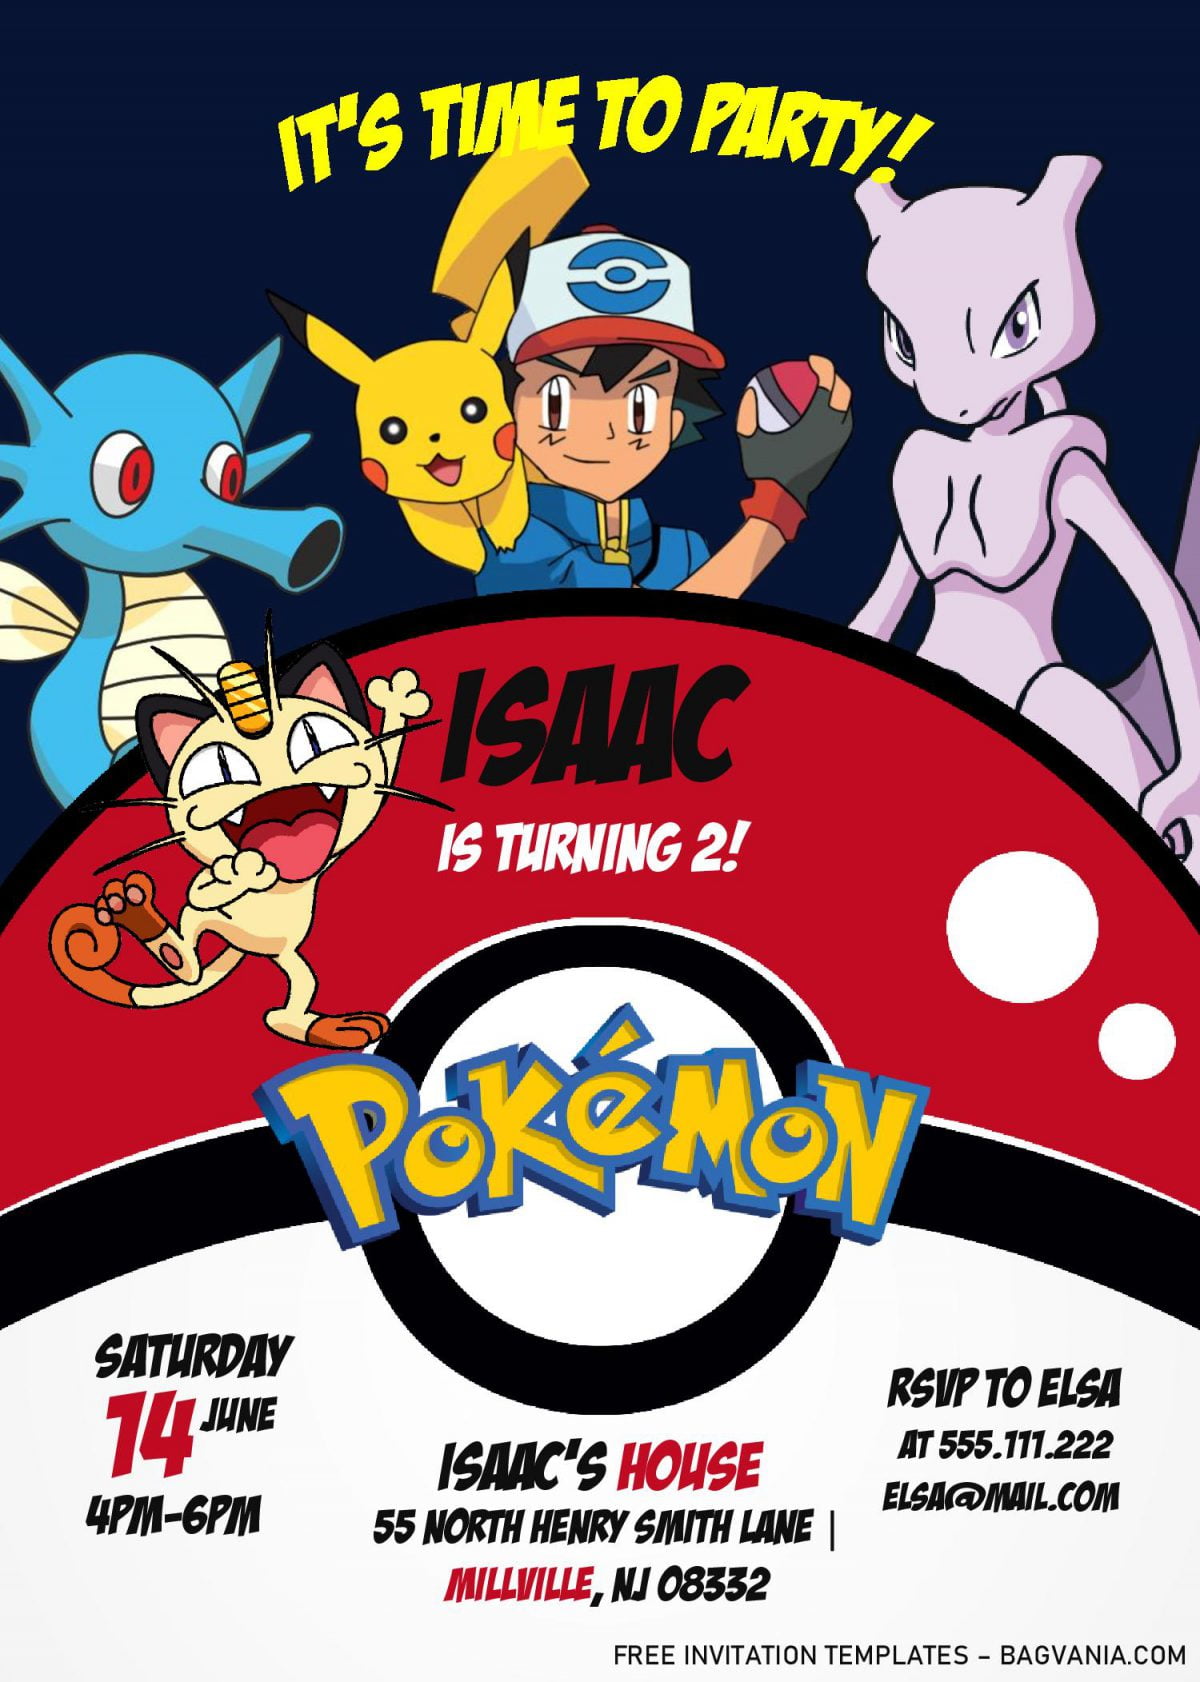 Pokemon Invitation Templates - Editable With MS Word and has meowth and meo...